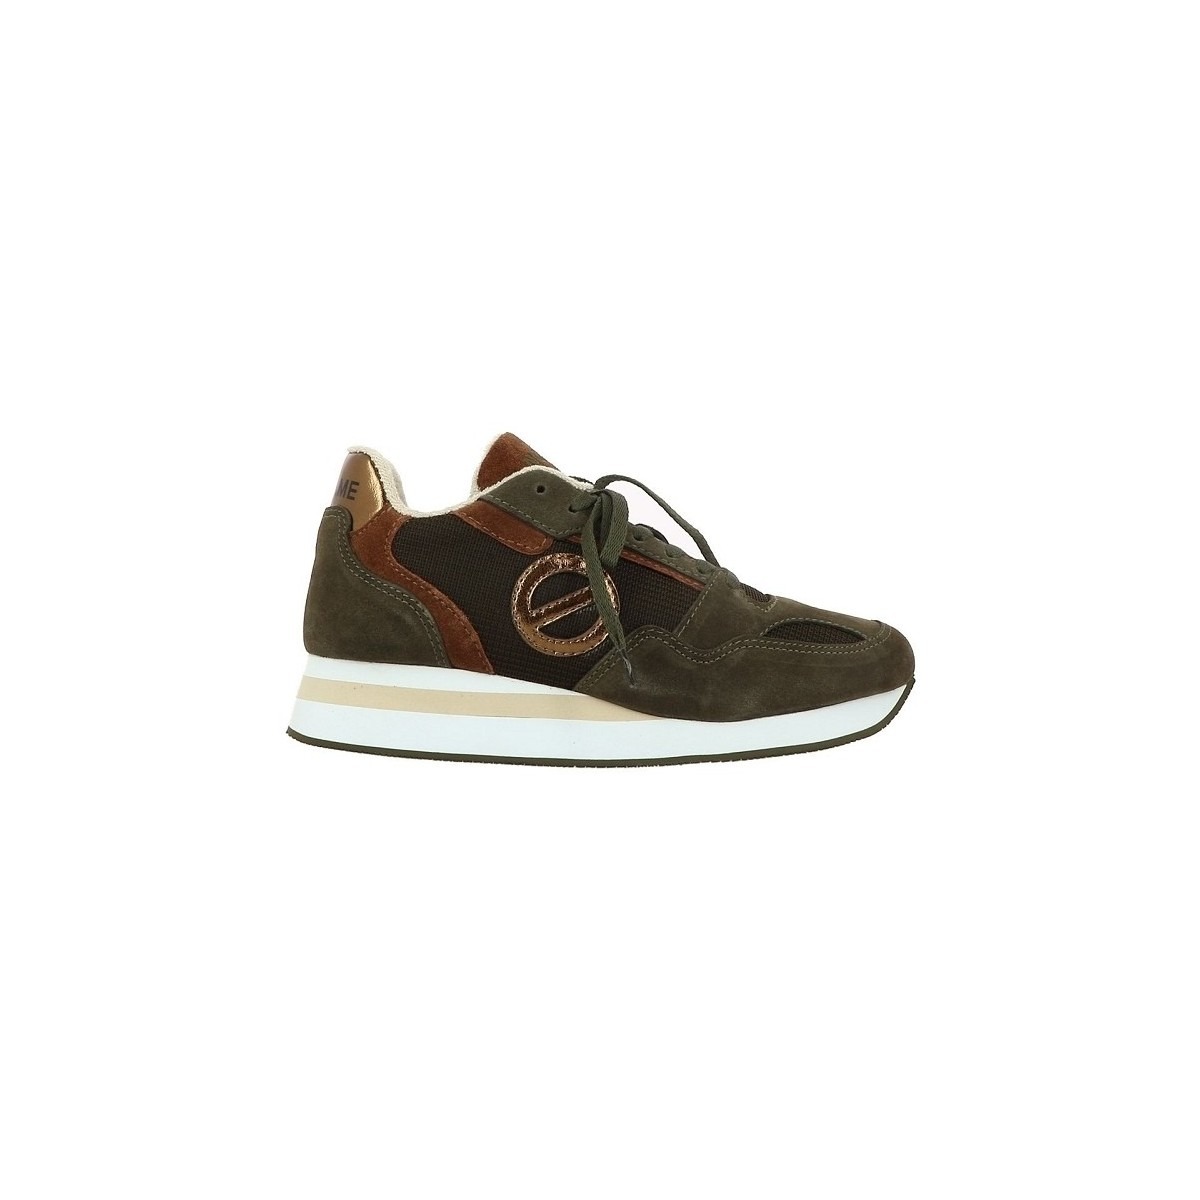 Spartoo - Womens Sneakers in Brown - No Name GOOFASH